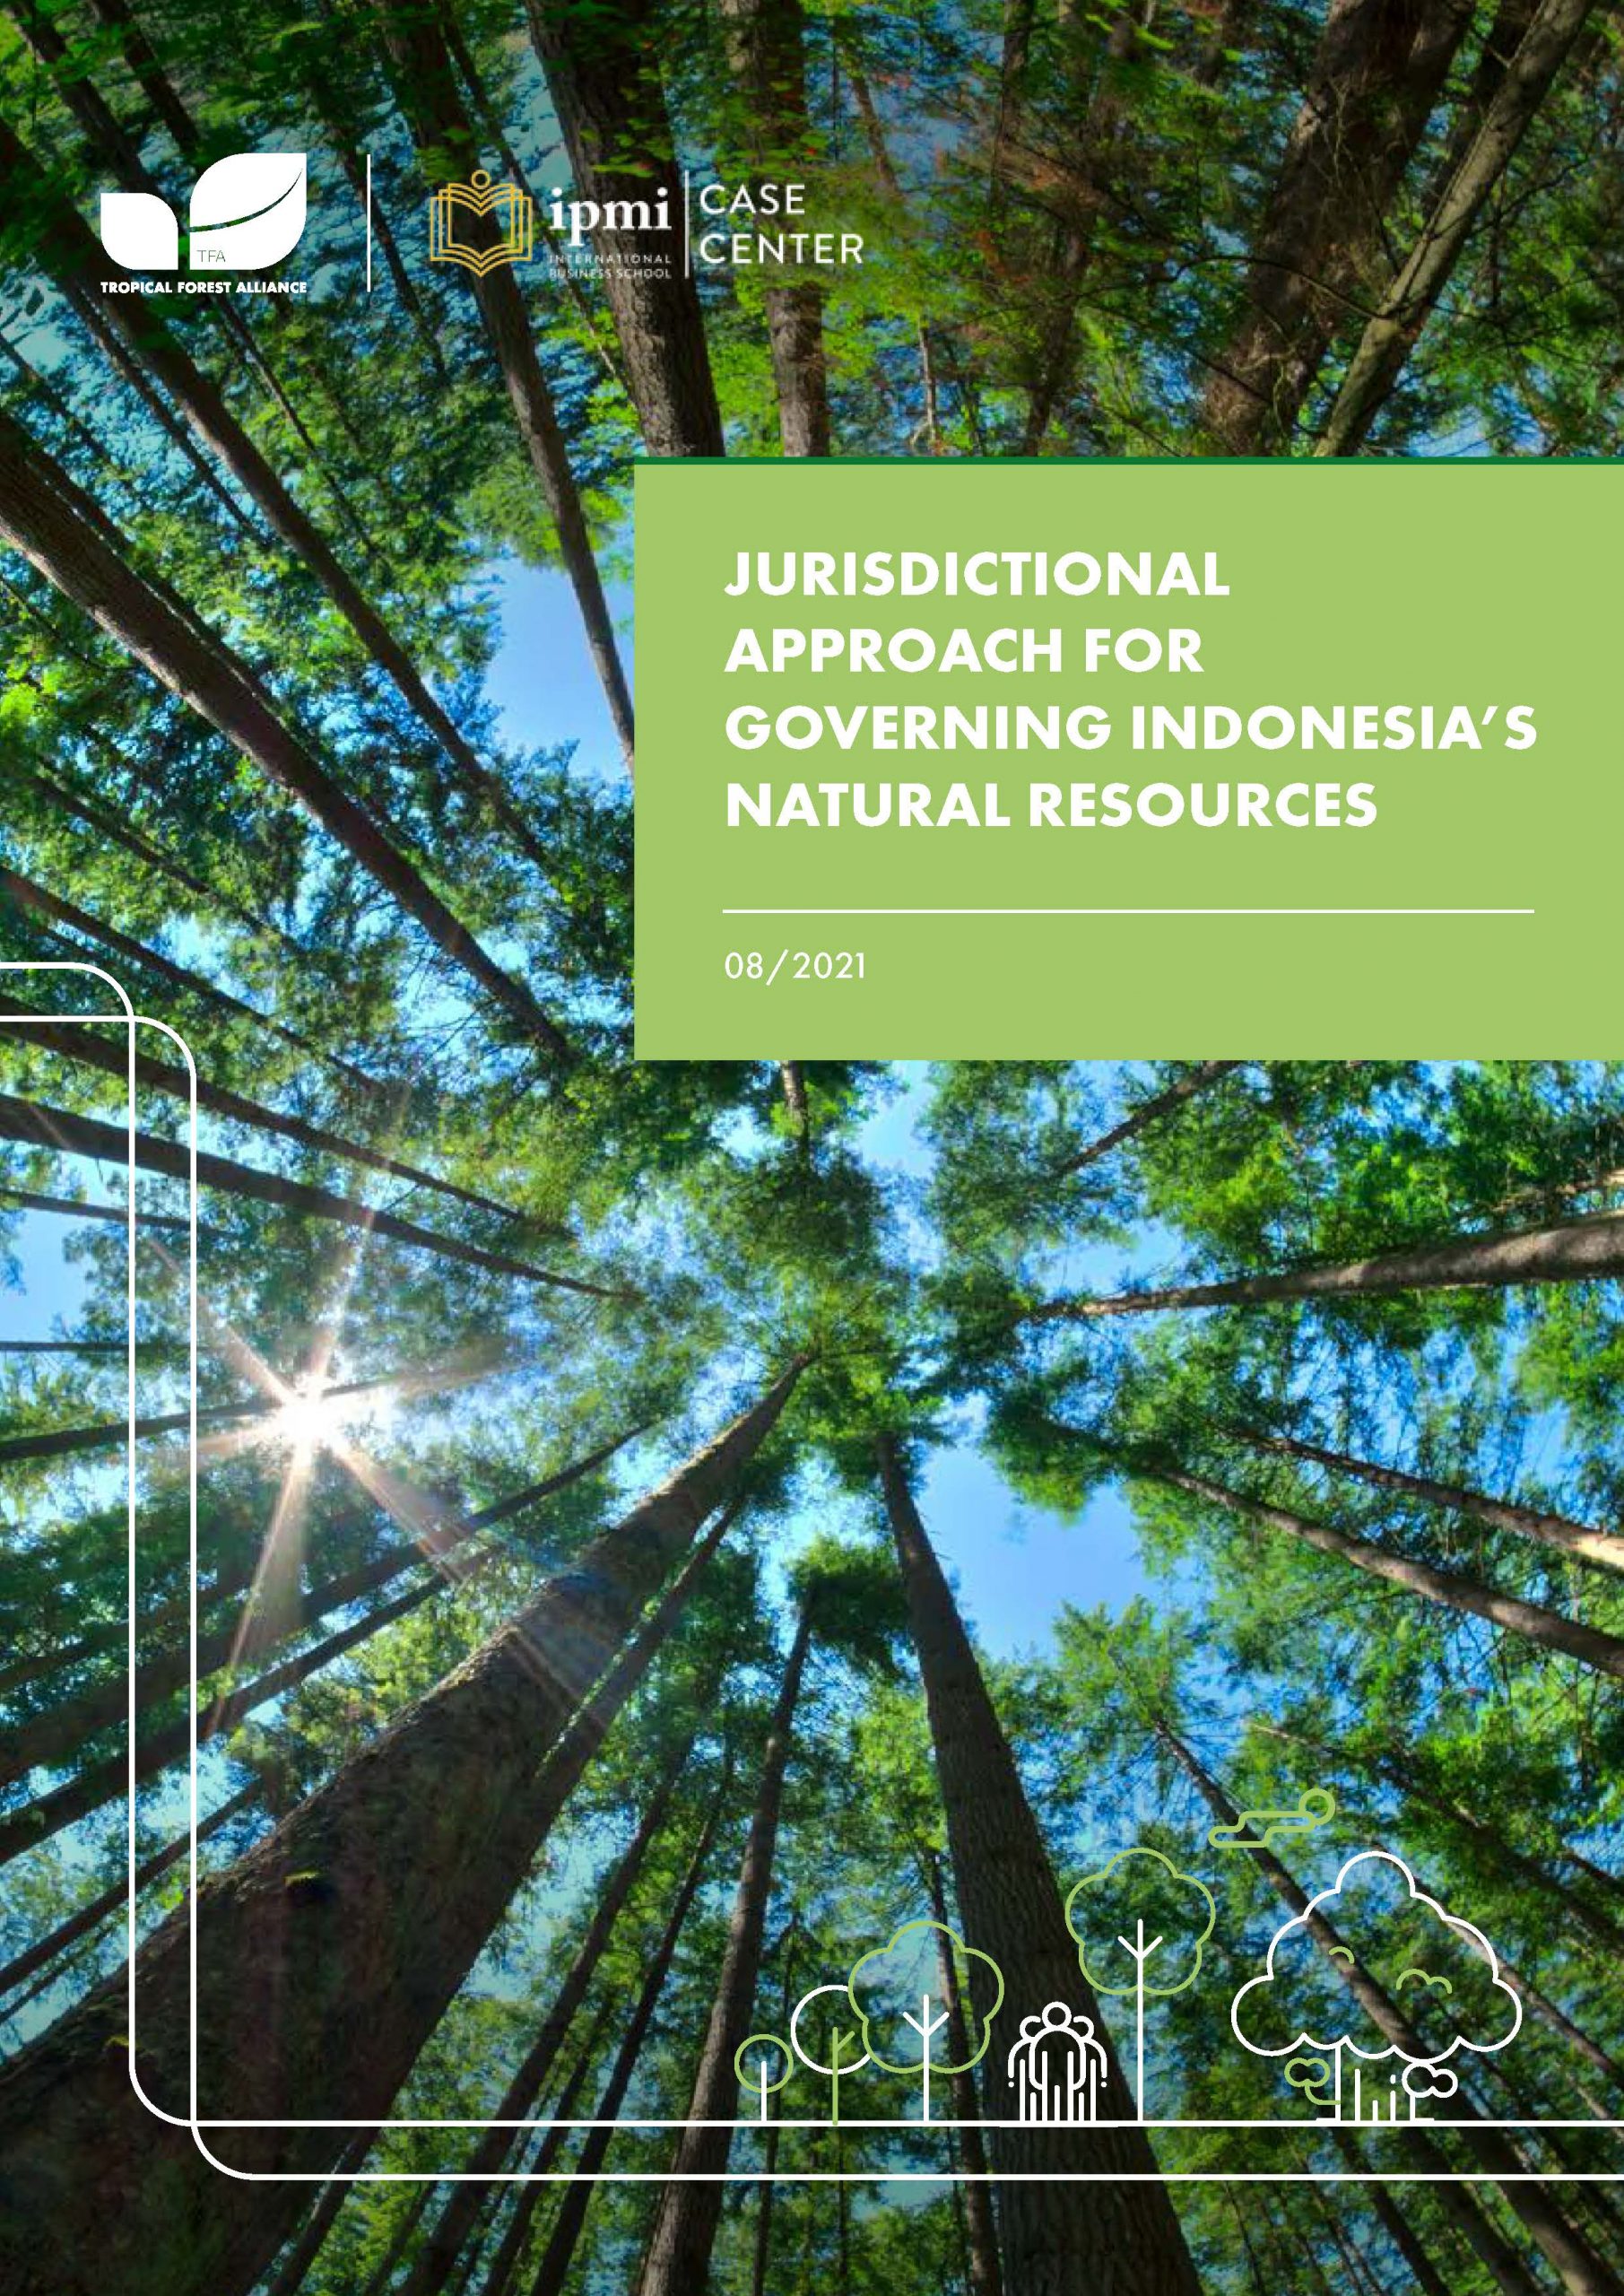 Jurisdictional Approach For Governing Indonesia’s Natural Resources